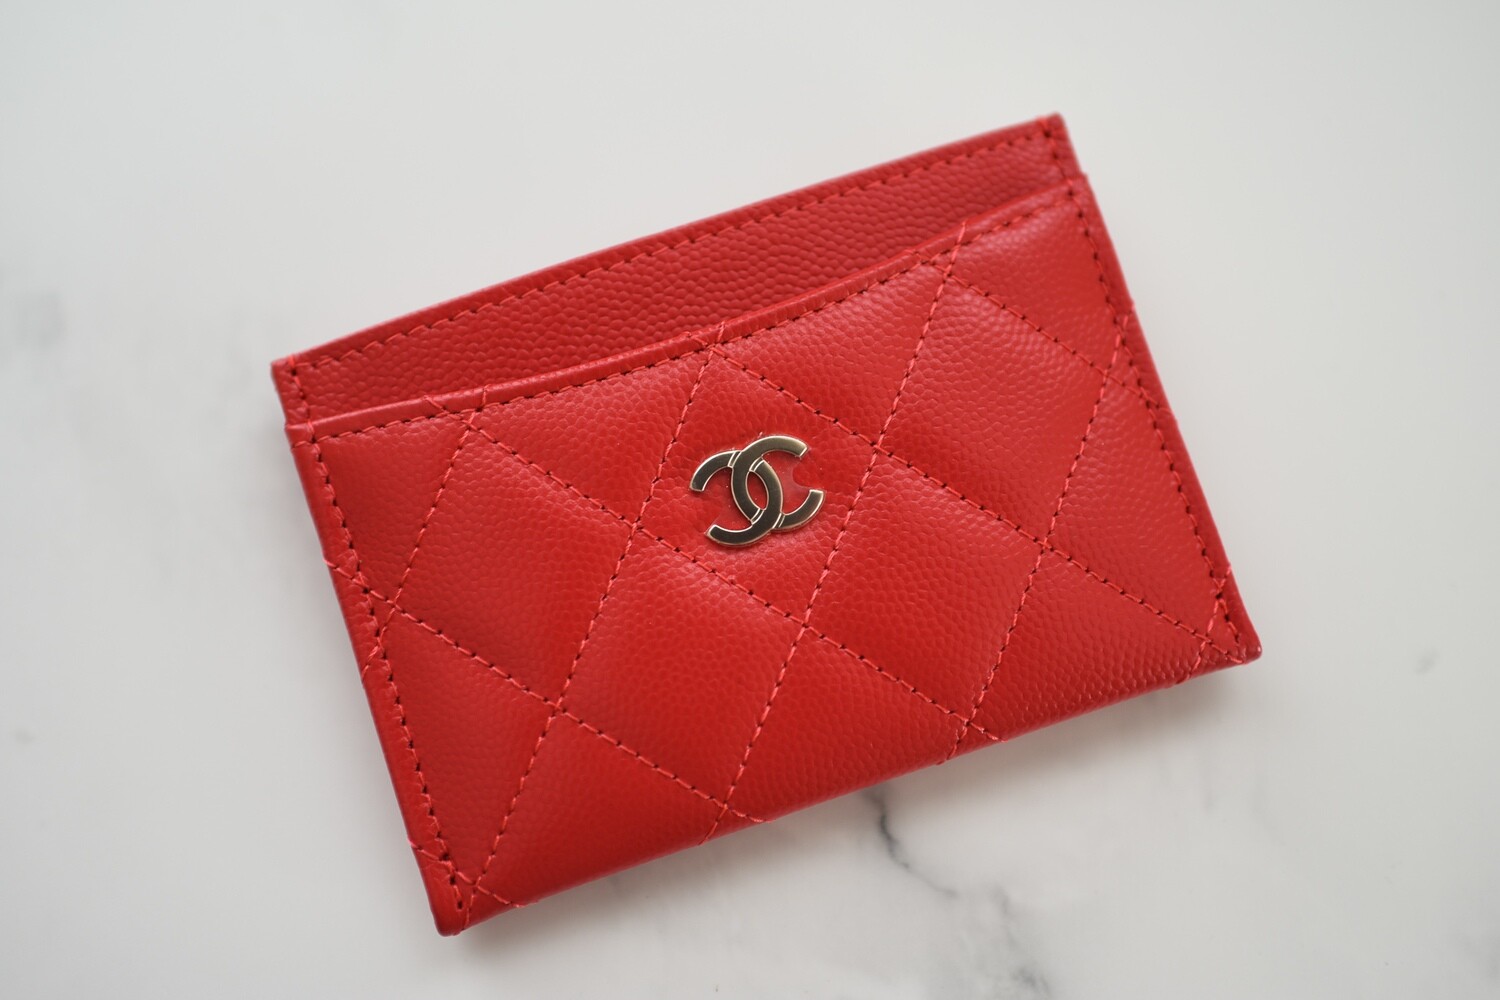 Chanel Flat Card Holder, Red Caviar with Gold Hardware, New in Box GA006